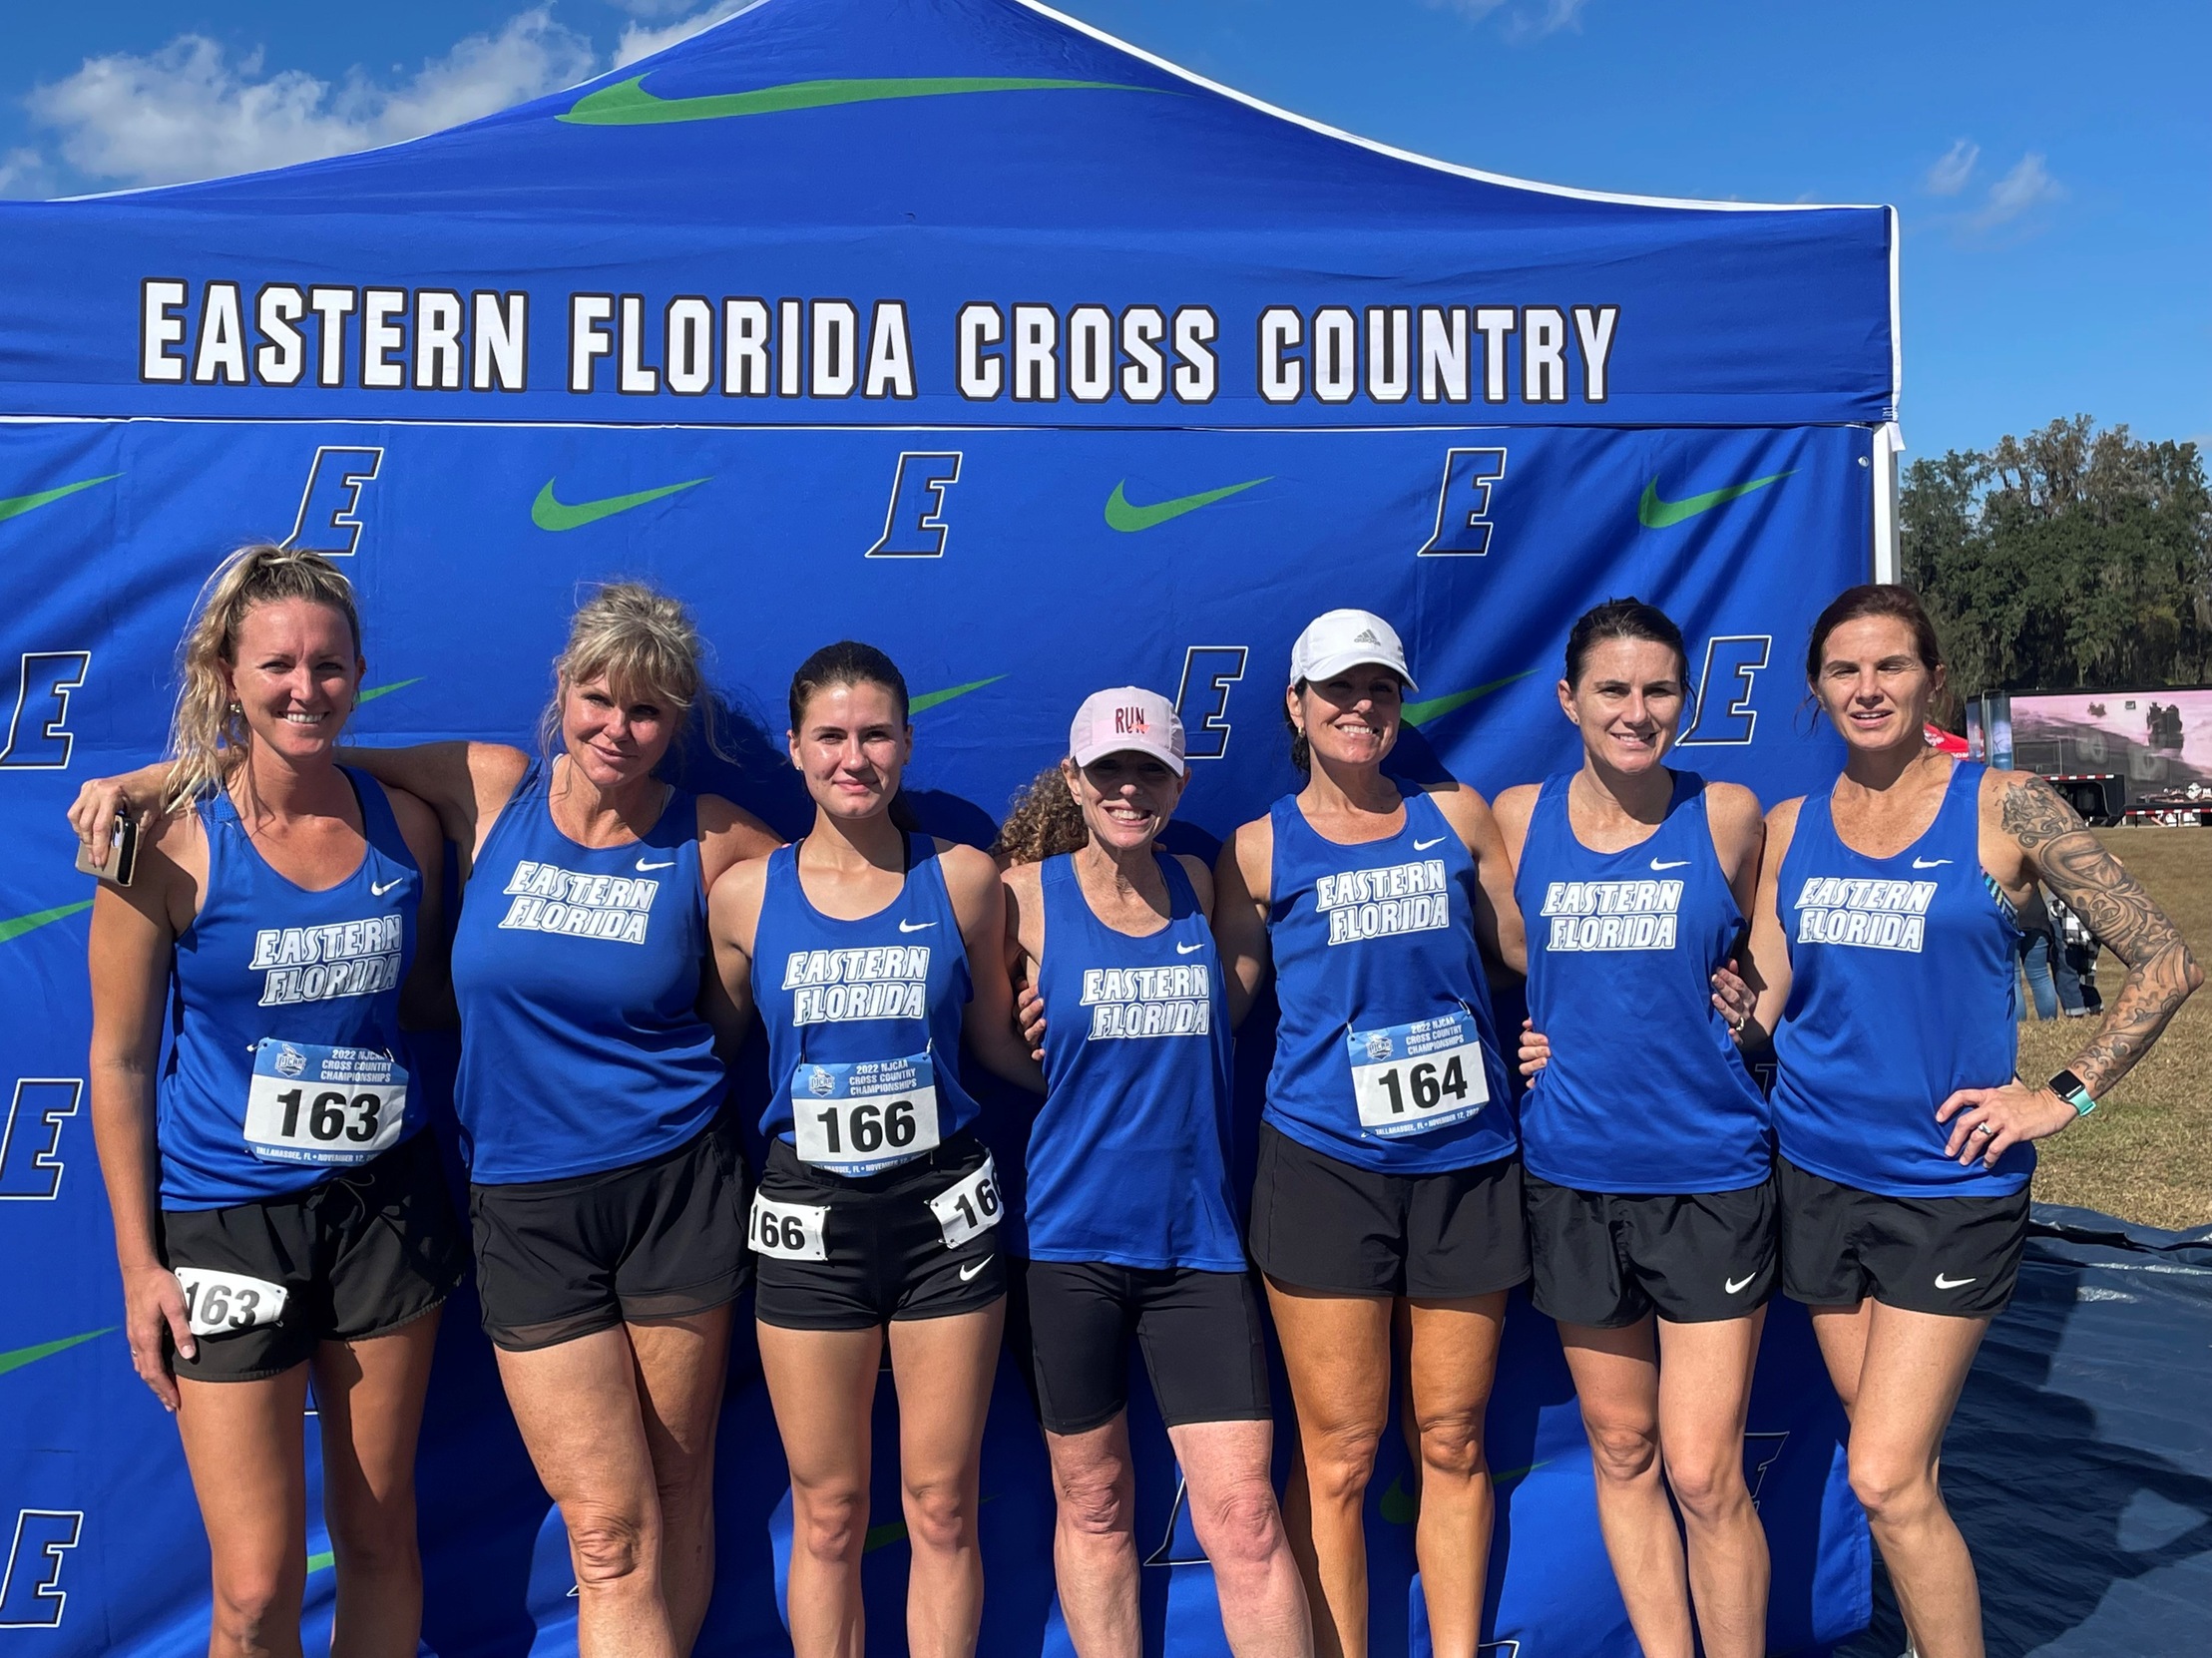 Women's cross country team places 19th overall at national tournament